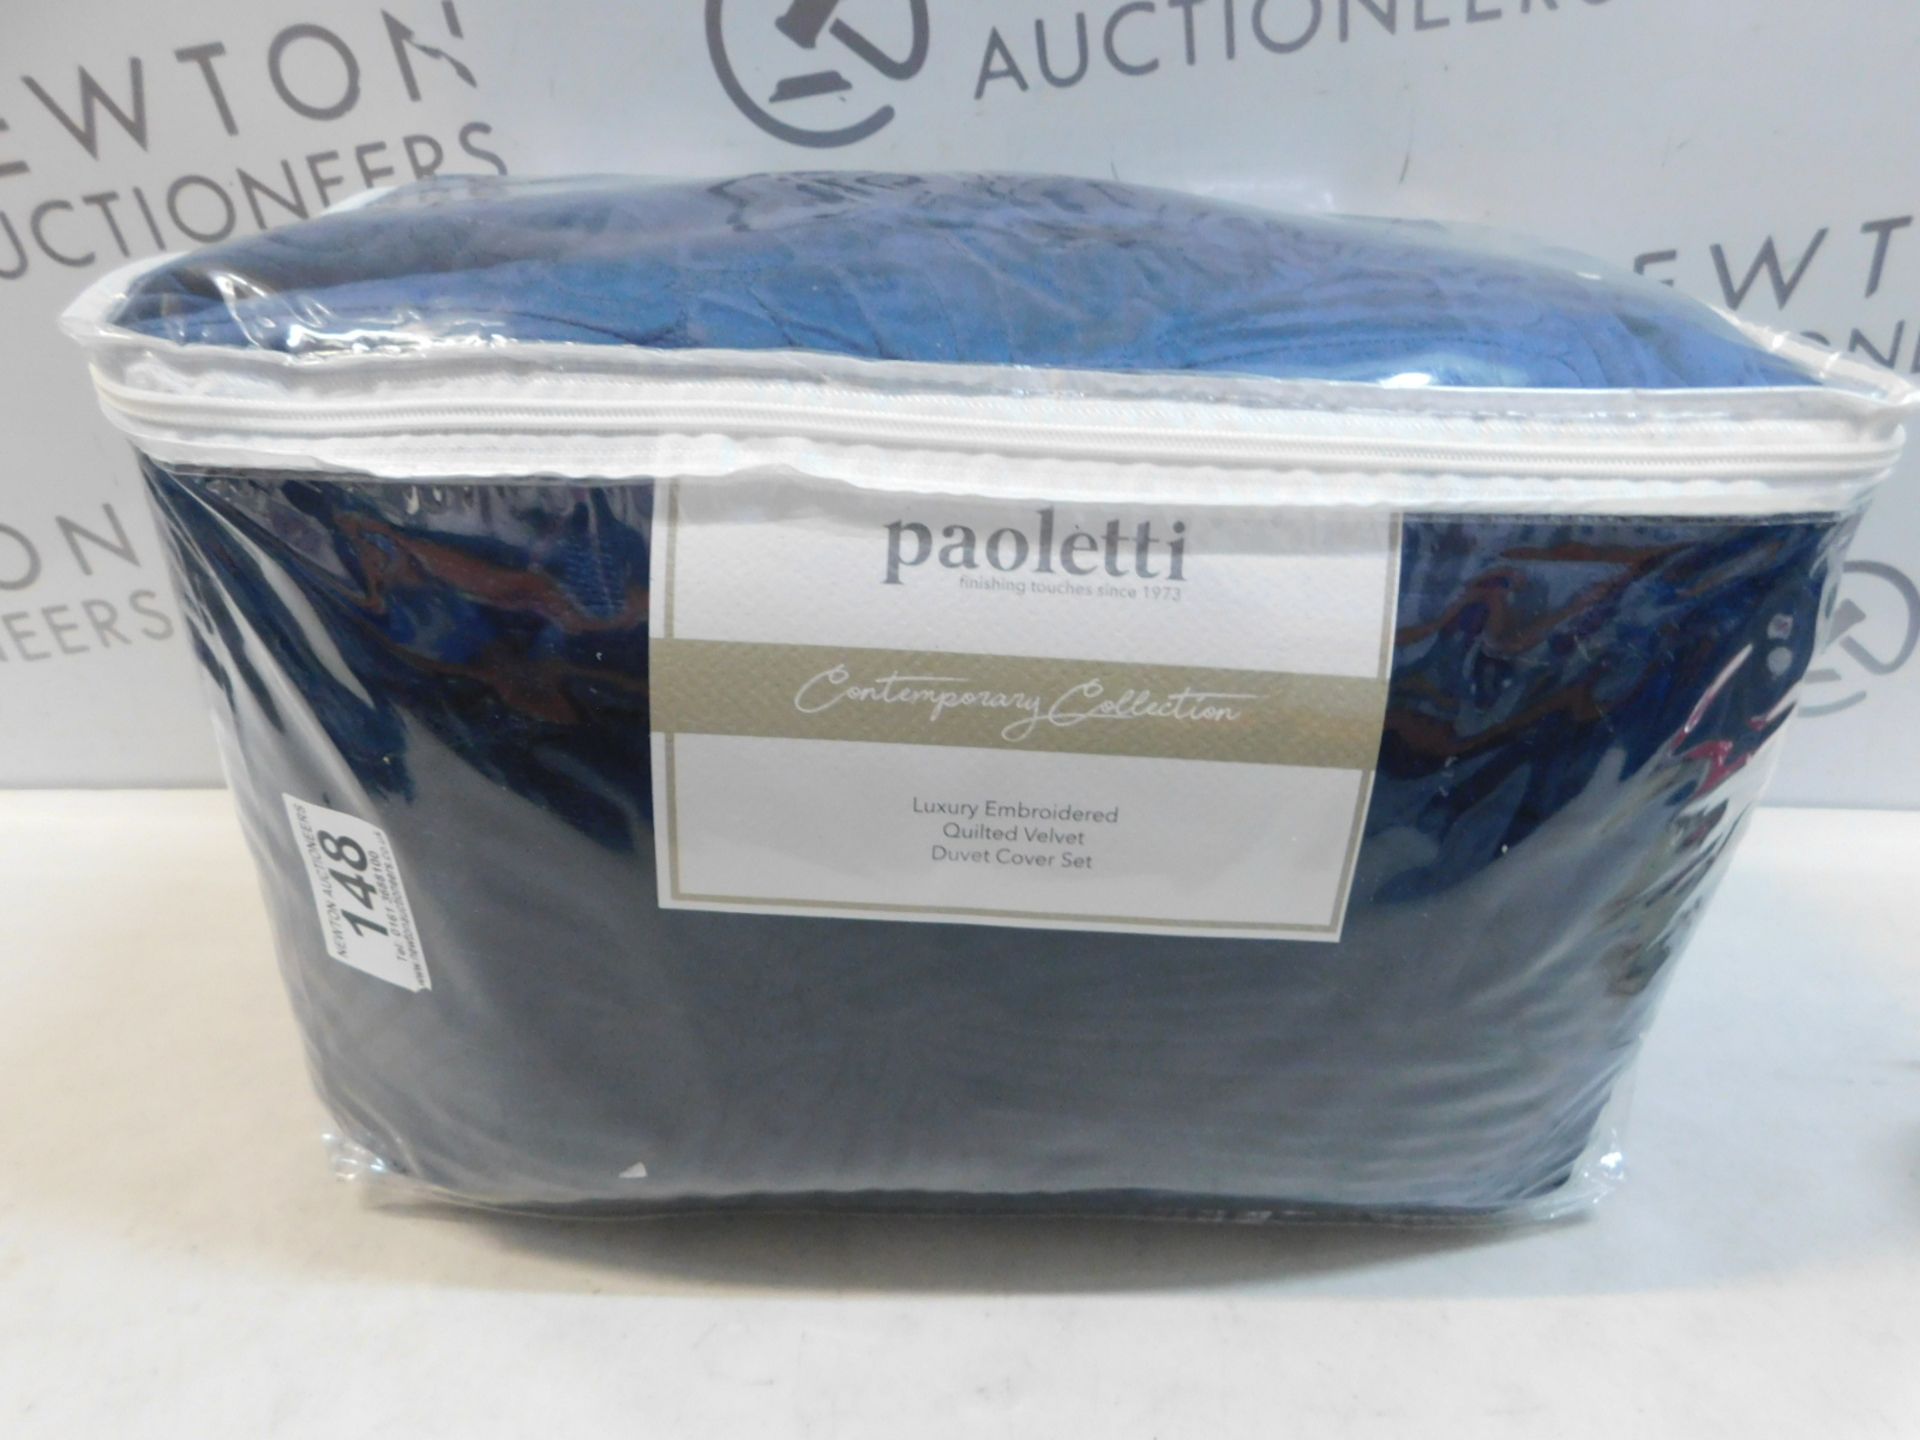 1 BAGGED PAOLETTI LUXURY EMBROIDERED QUILTED VELVET DUVET COVER SET RRP Â£69